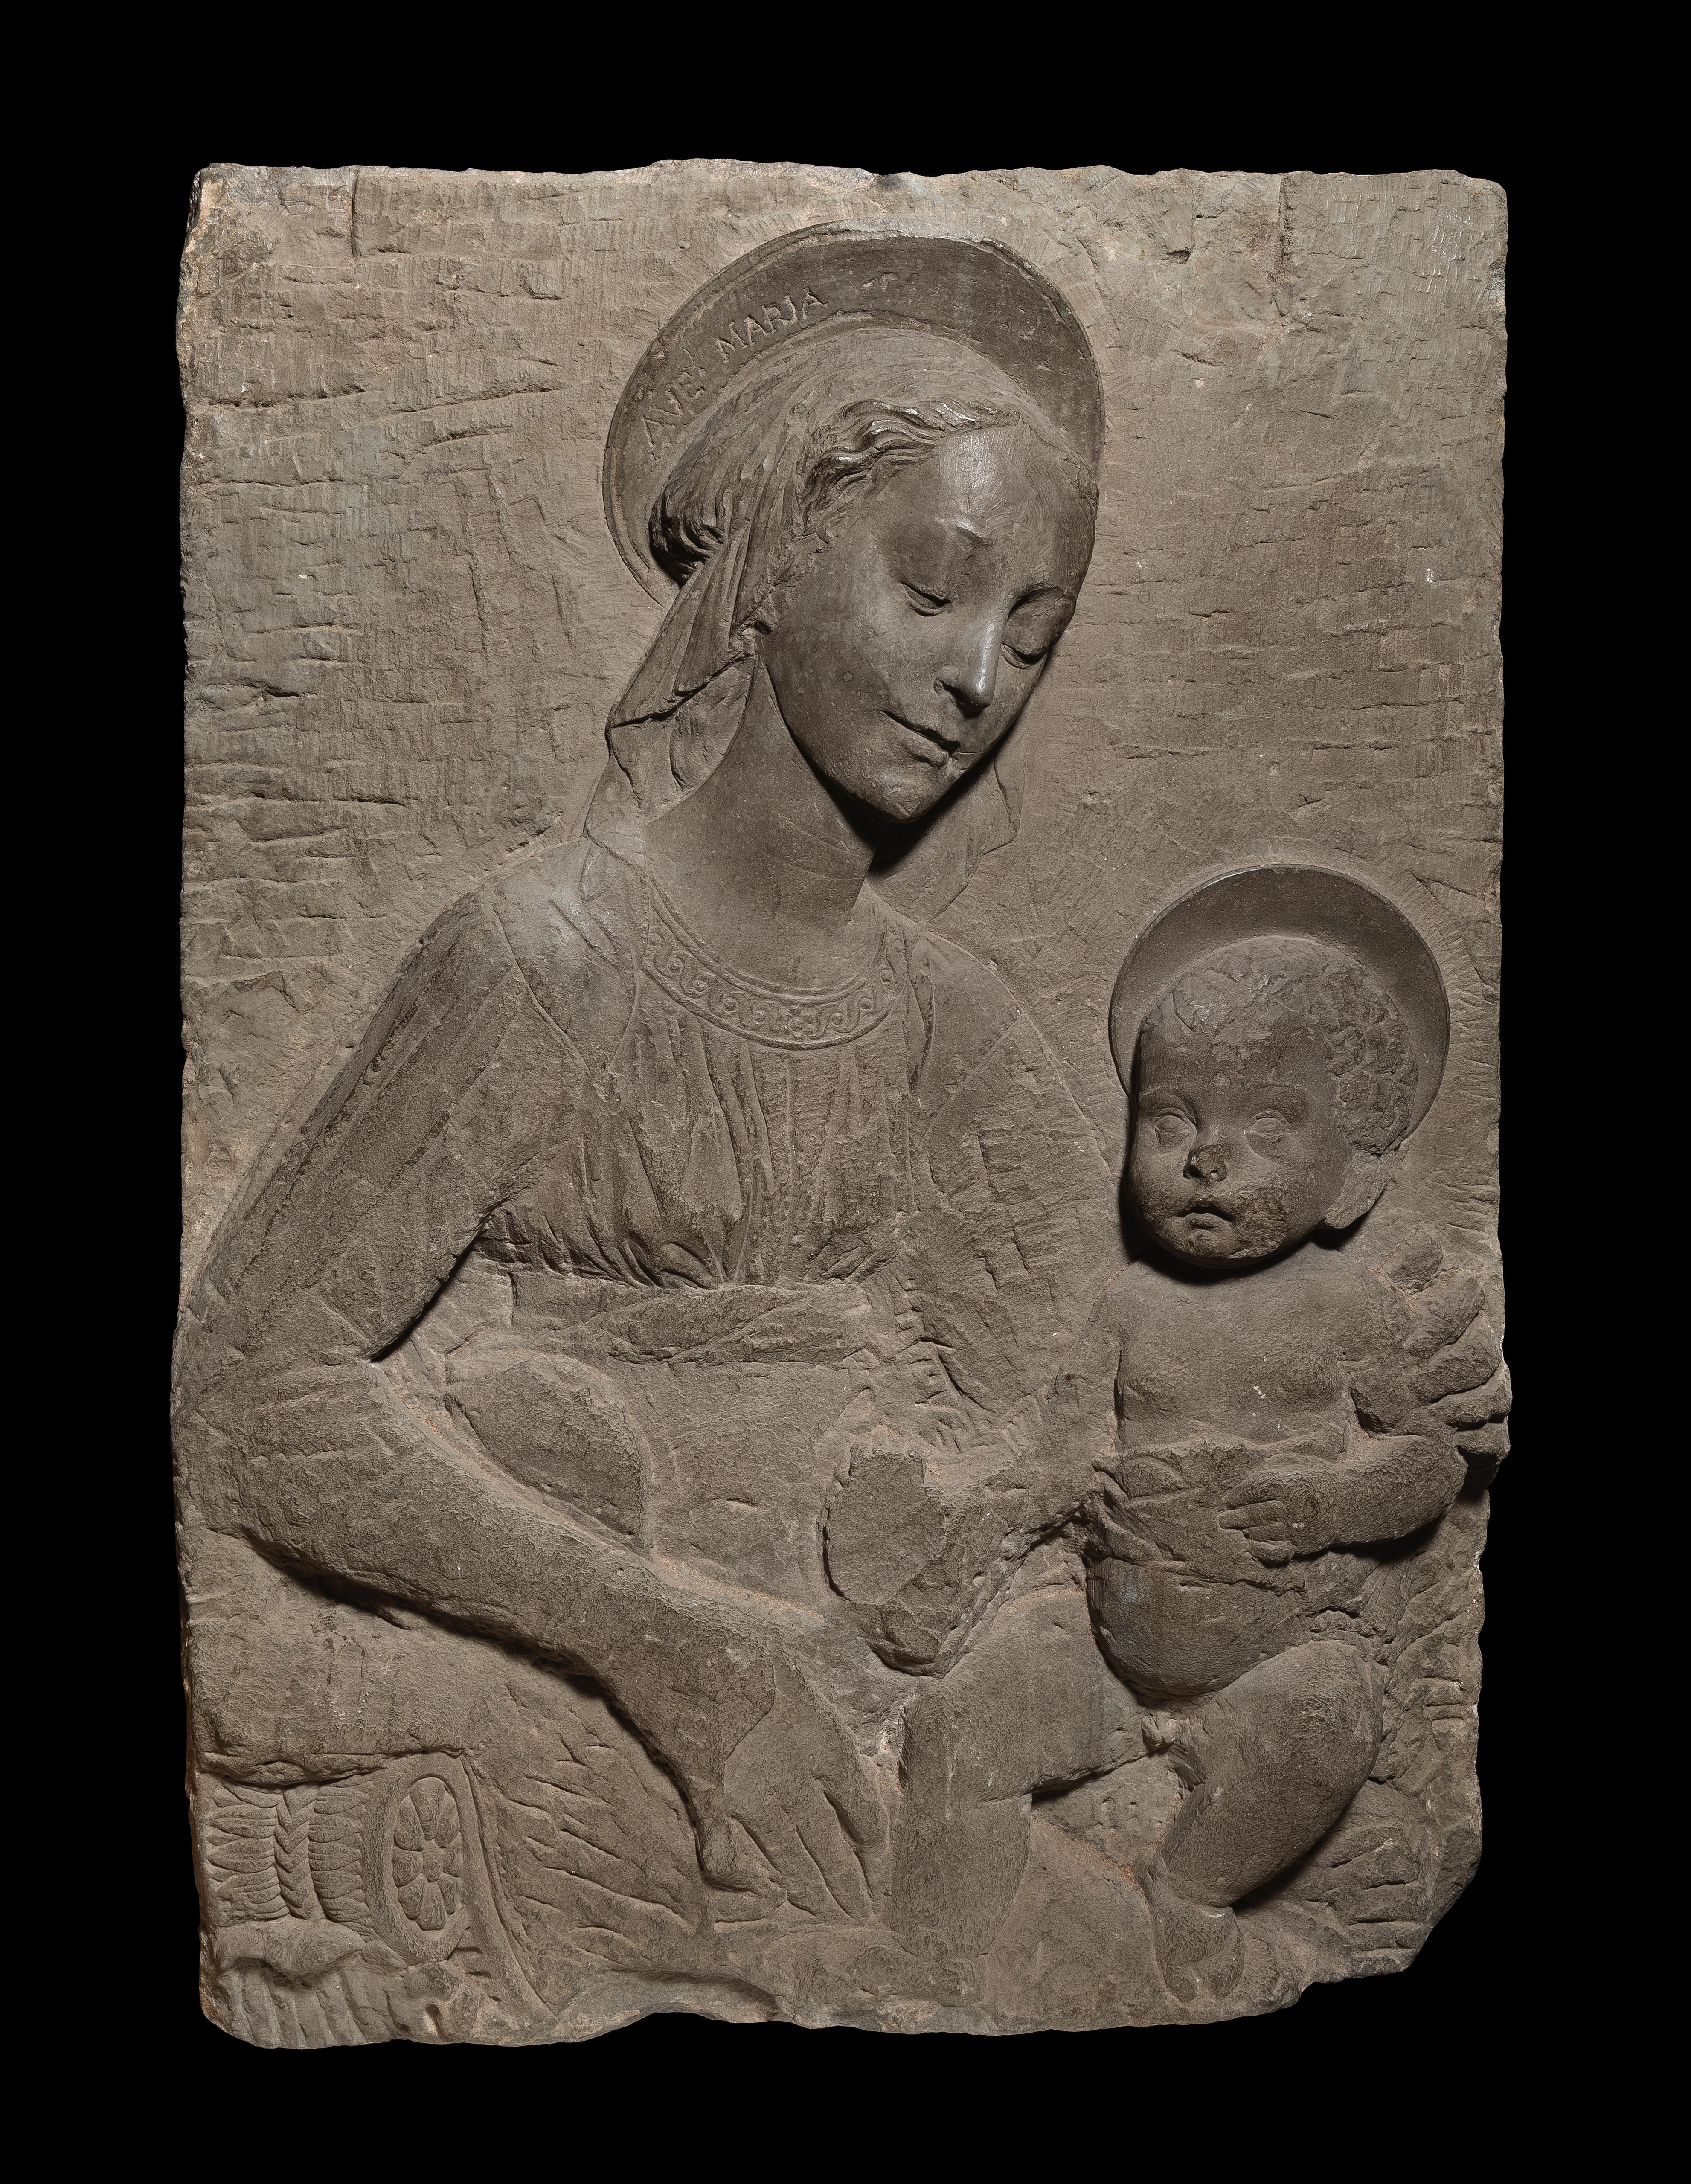 Florentine School of the late 15th century Figurative Sculpture - Late 15th Century By Florentine School Madonna with Child Bas-relief